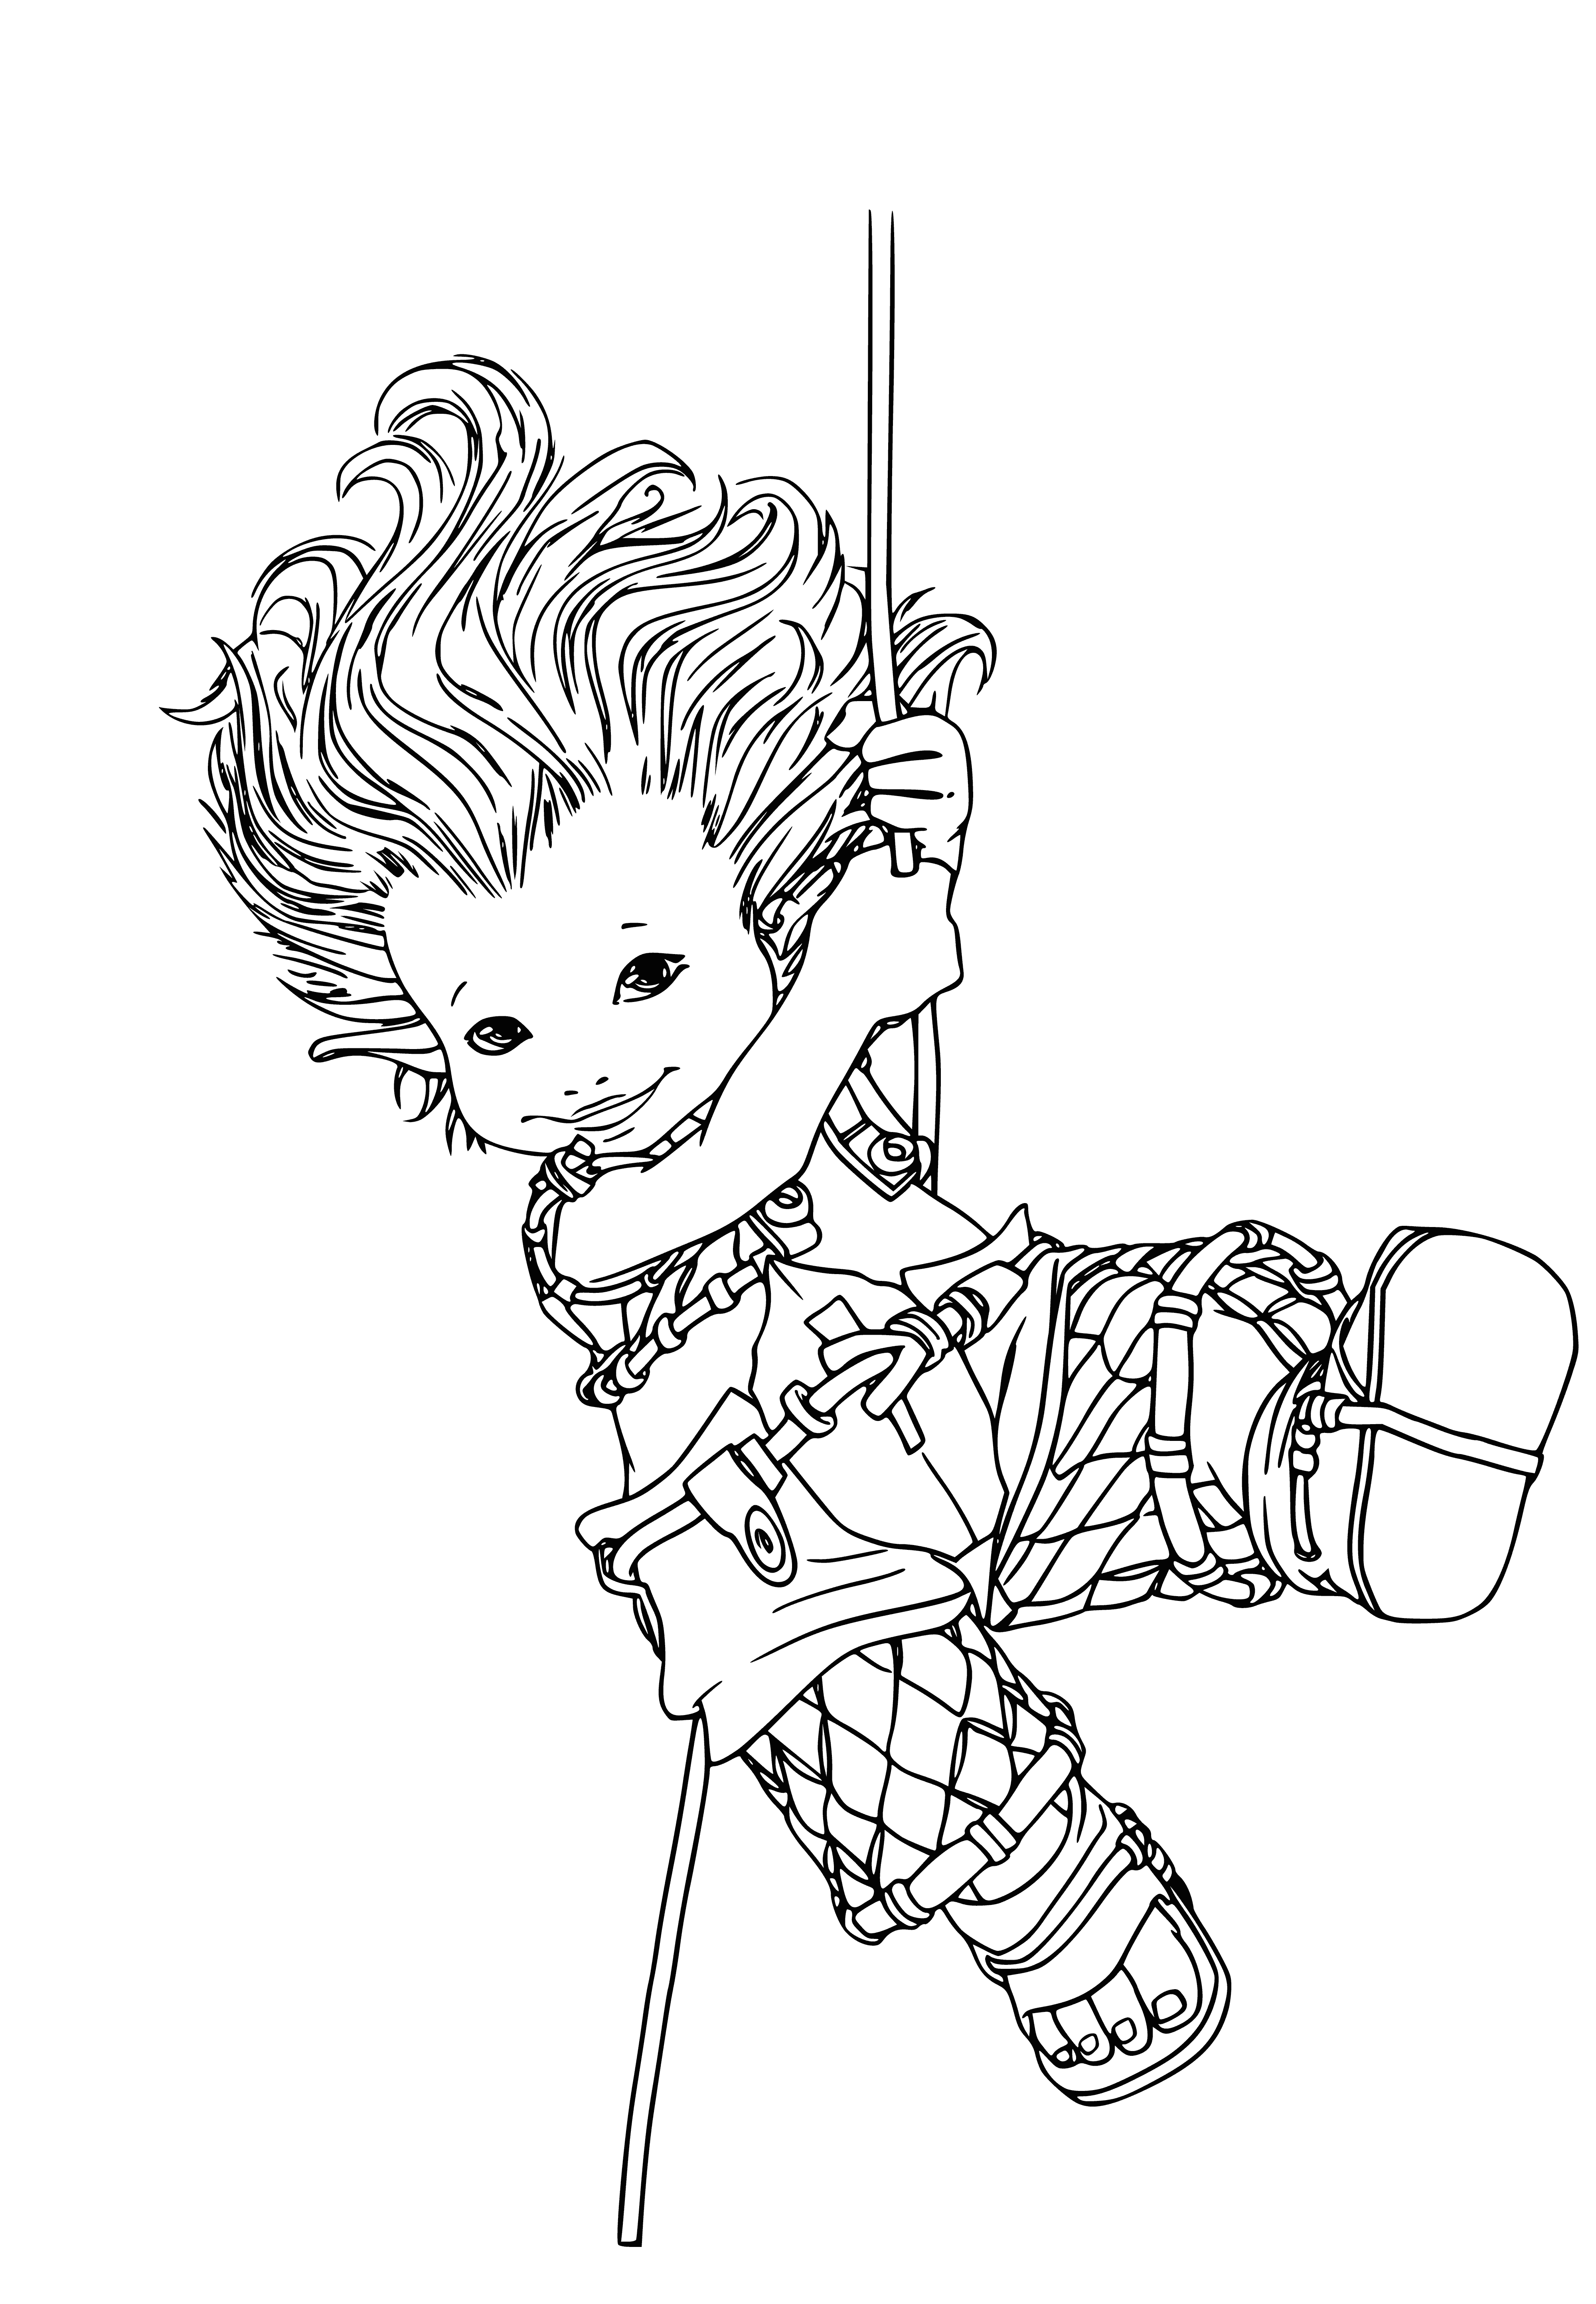 Junk on a rope coloring page